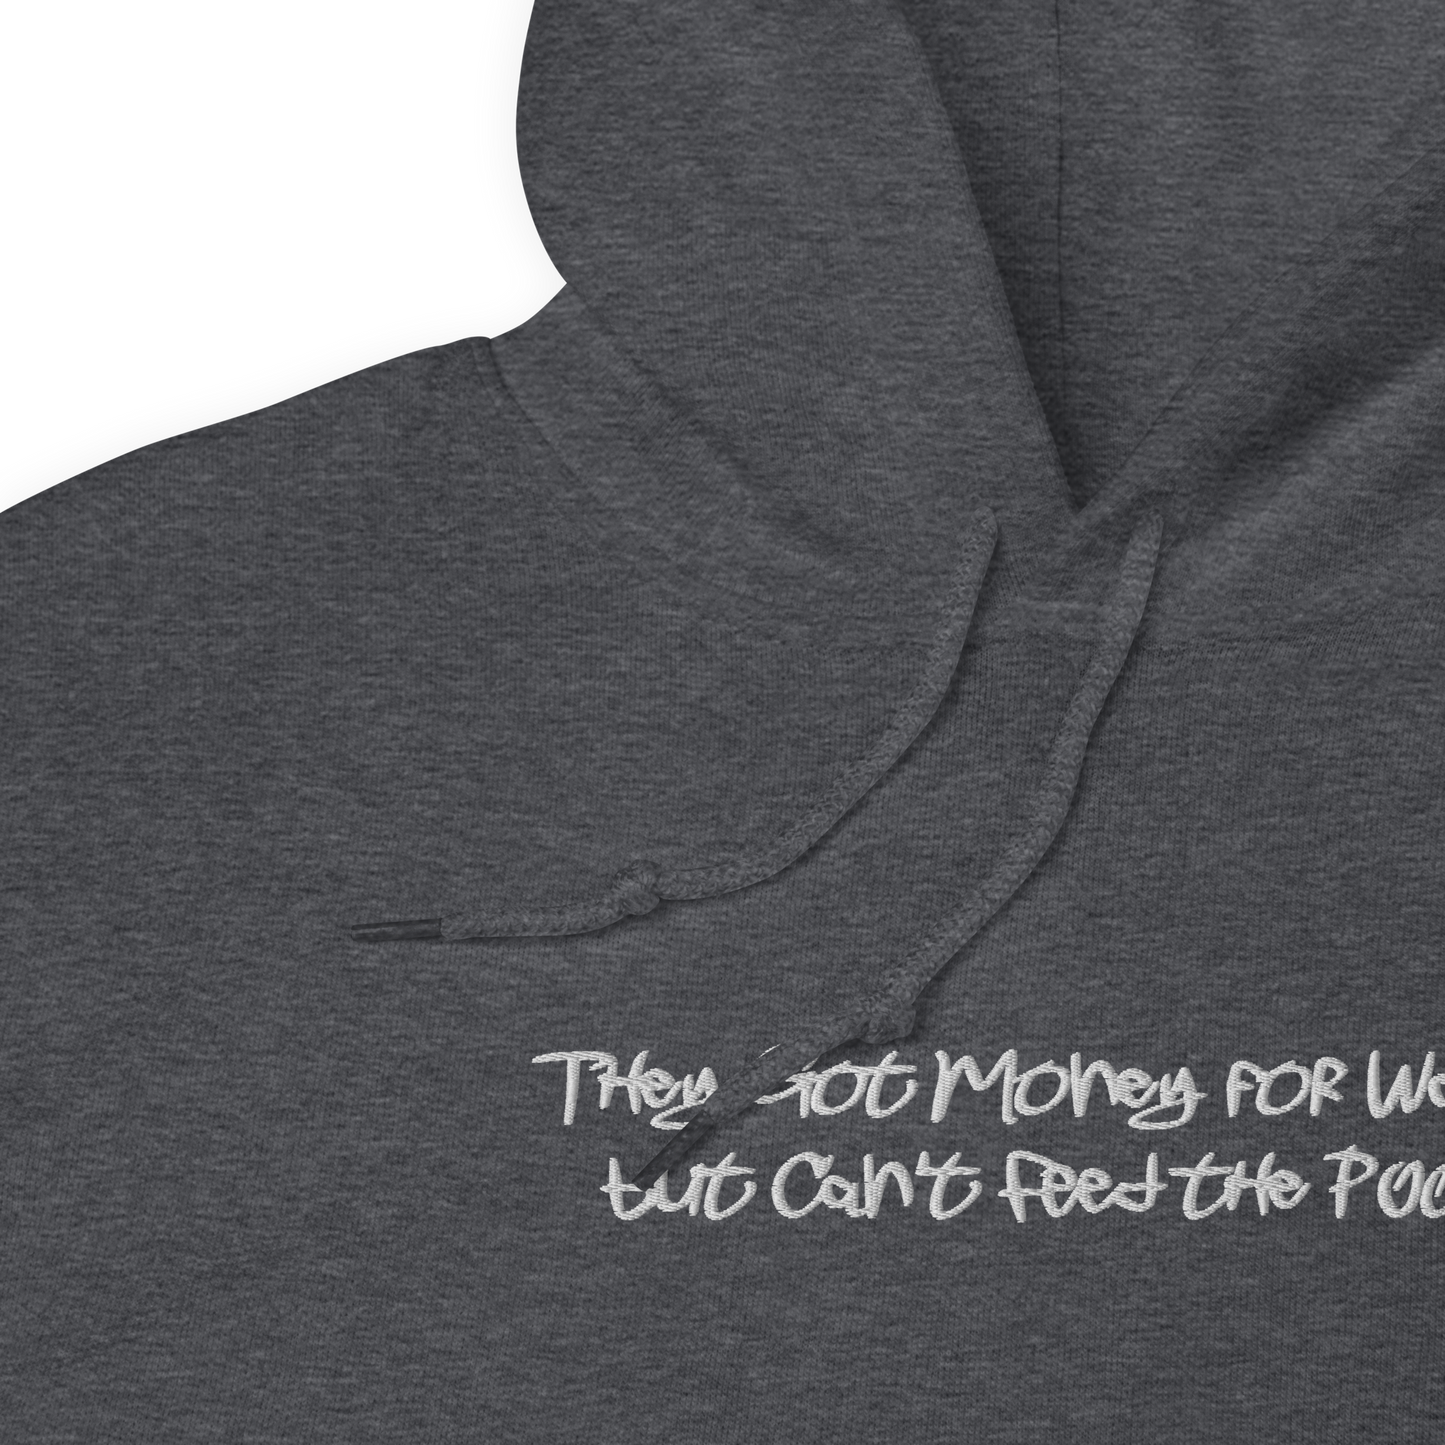 They Got Money for Wars... Embroidered Hoodie